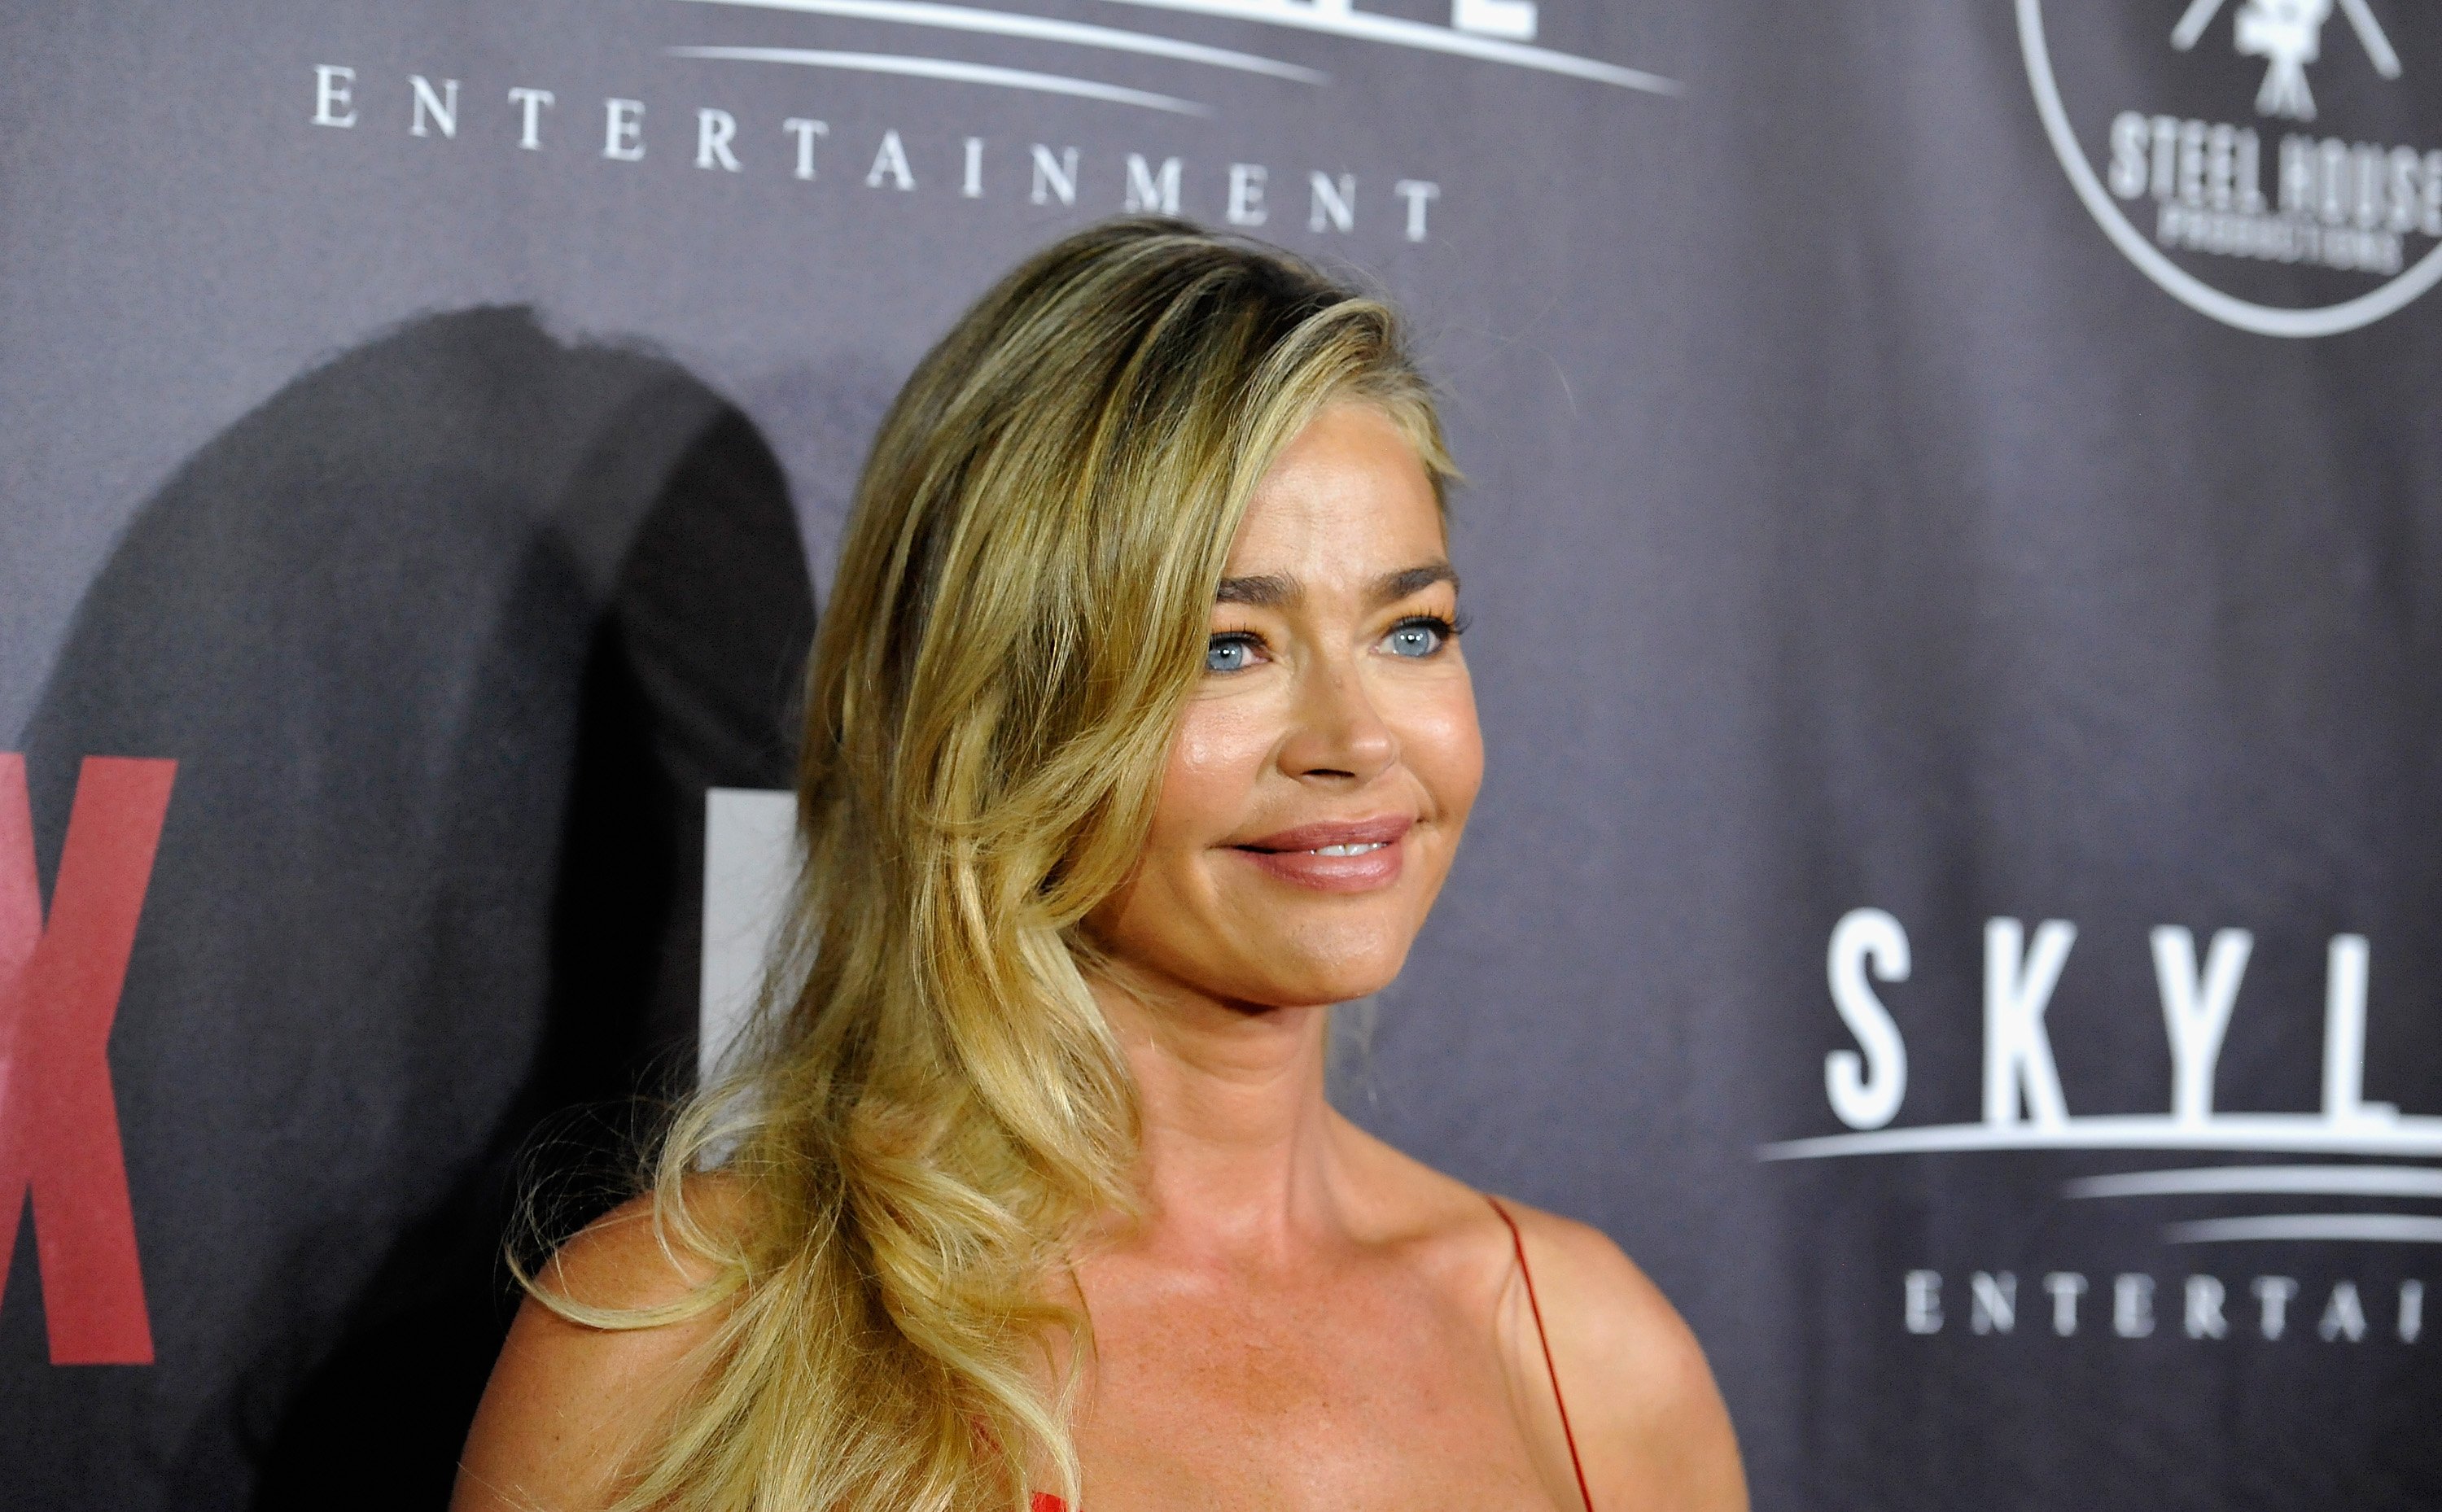 ‘RHOBH’: Denise Richards Left the ‘American Idol’ Finale Because of a Phobia